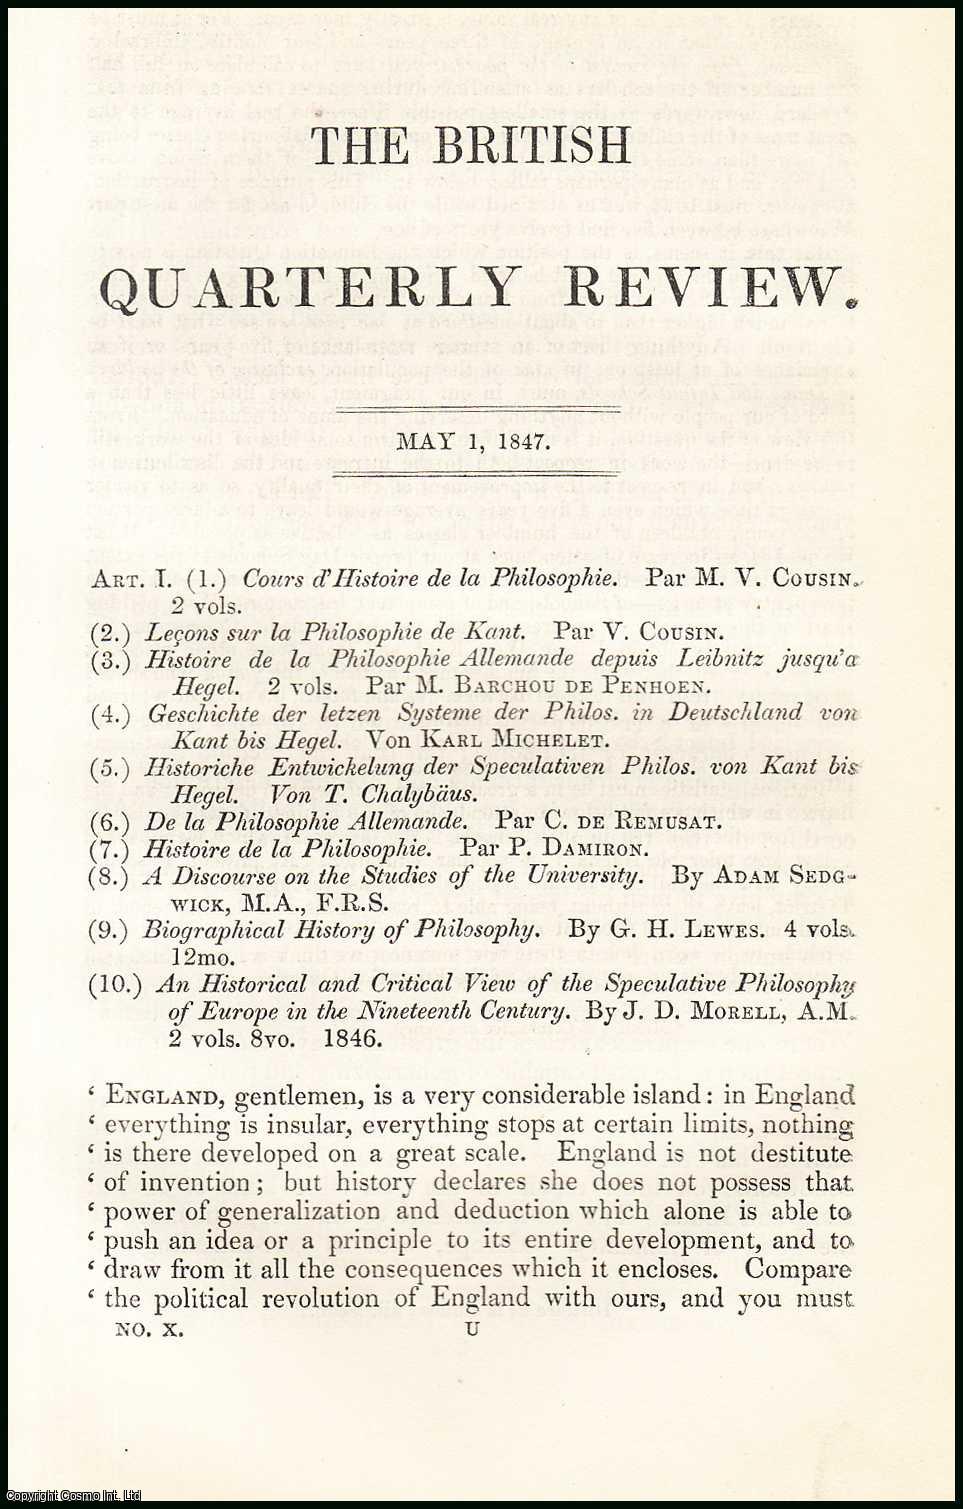 Robert Vaughan - Locke and his Critics. A rare original article from the British Quarterly Review, 1847.